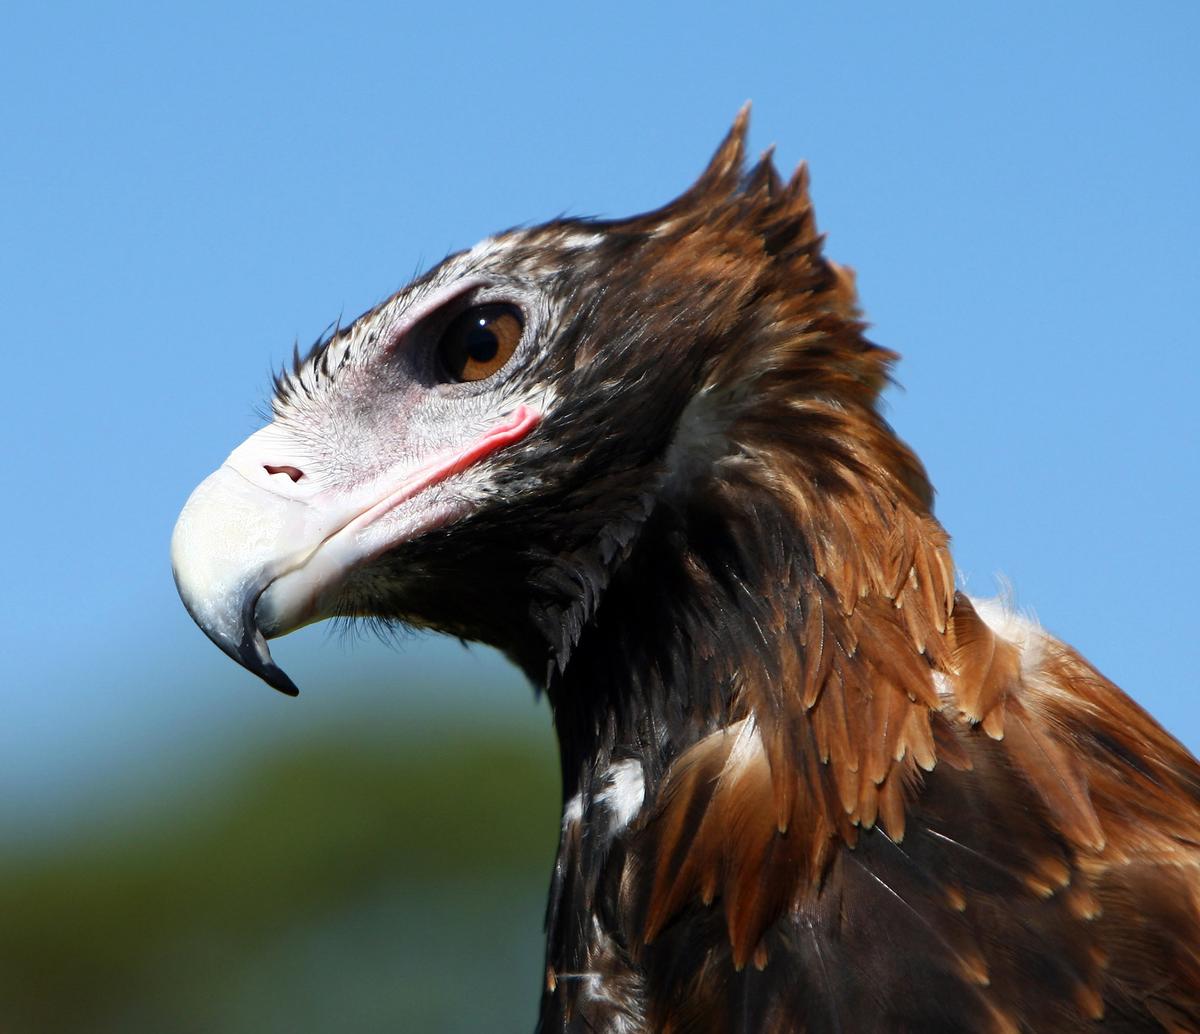 A wedge-tailed eagle. (<a href="https://www.gettyimages.co.uk/detail/news-photo/taronga-zoos-new-wedge-tailed-eagle-nonami-takes-her-first-news-photo/84045802?adppopup=true">TORSTEN BLACKWOOD/AFP via Getty Images</a>)